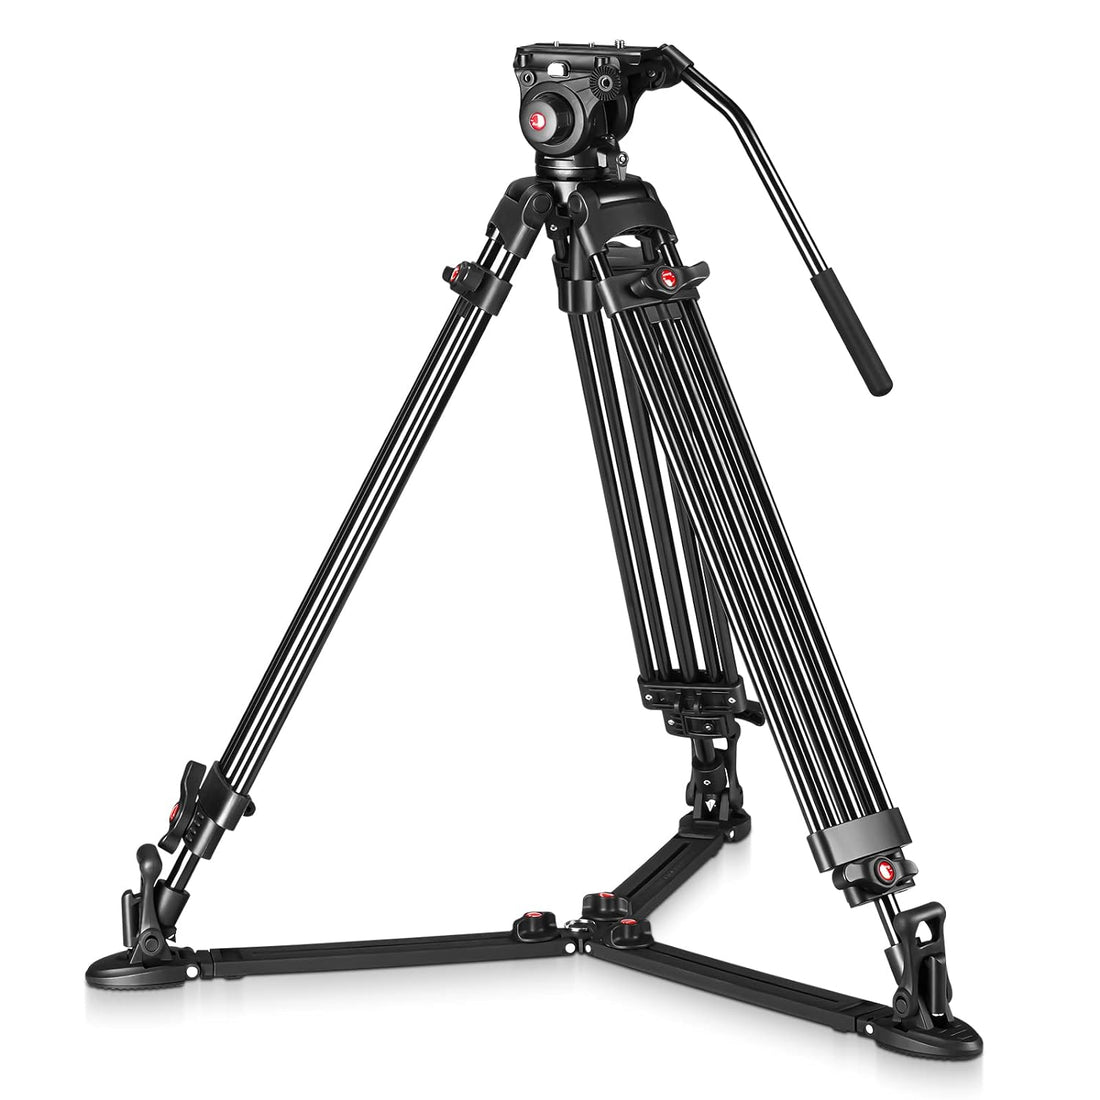 RAUBAY DV-2 Professional Fluid Head Video Tripod System, 69" Heavy Duty Camera Stands with Ground Spreader, Aluminium Twin Leg, QR Plate, Max Load 17lbs for DSLR, Digital Cine Style, Camcorder